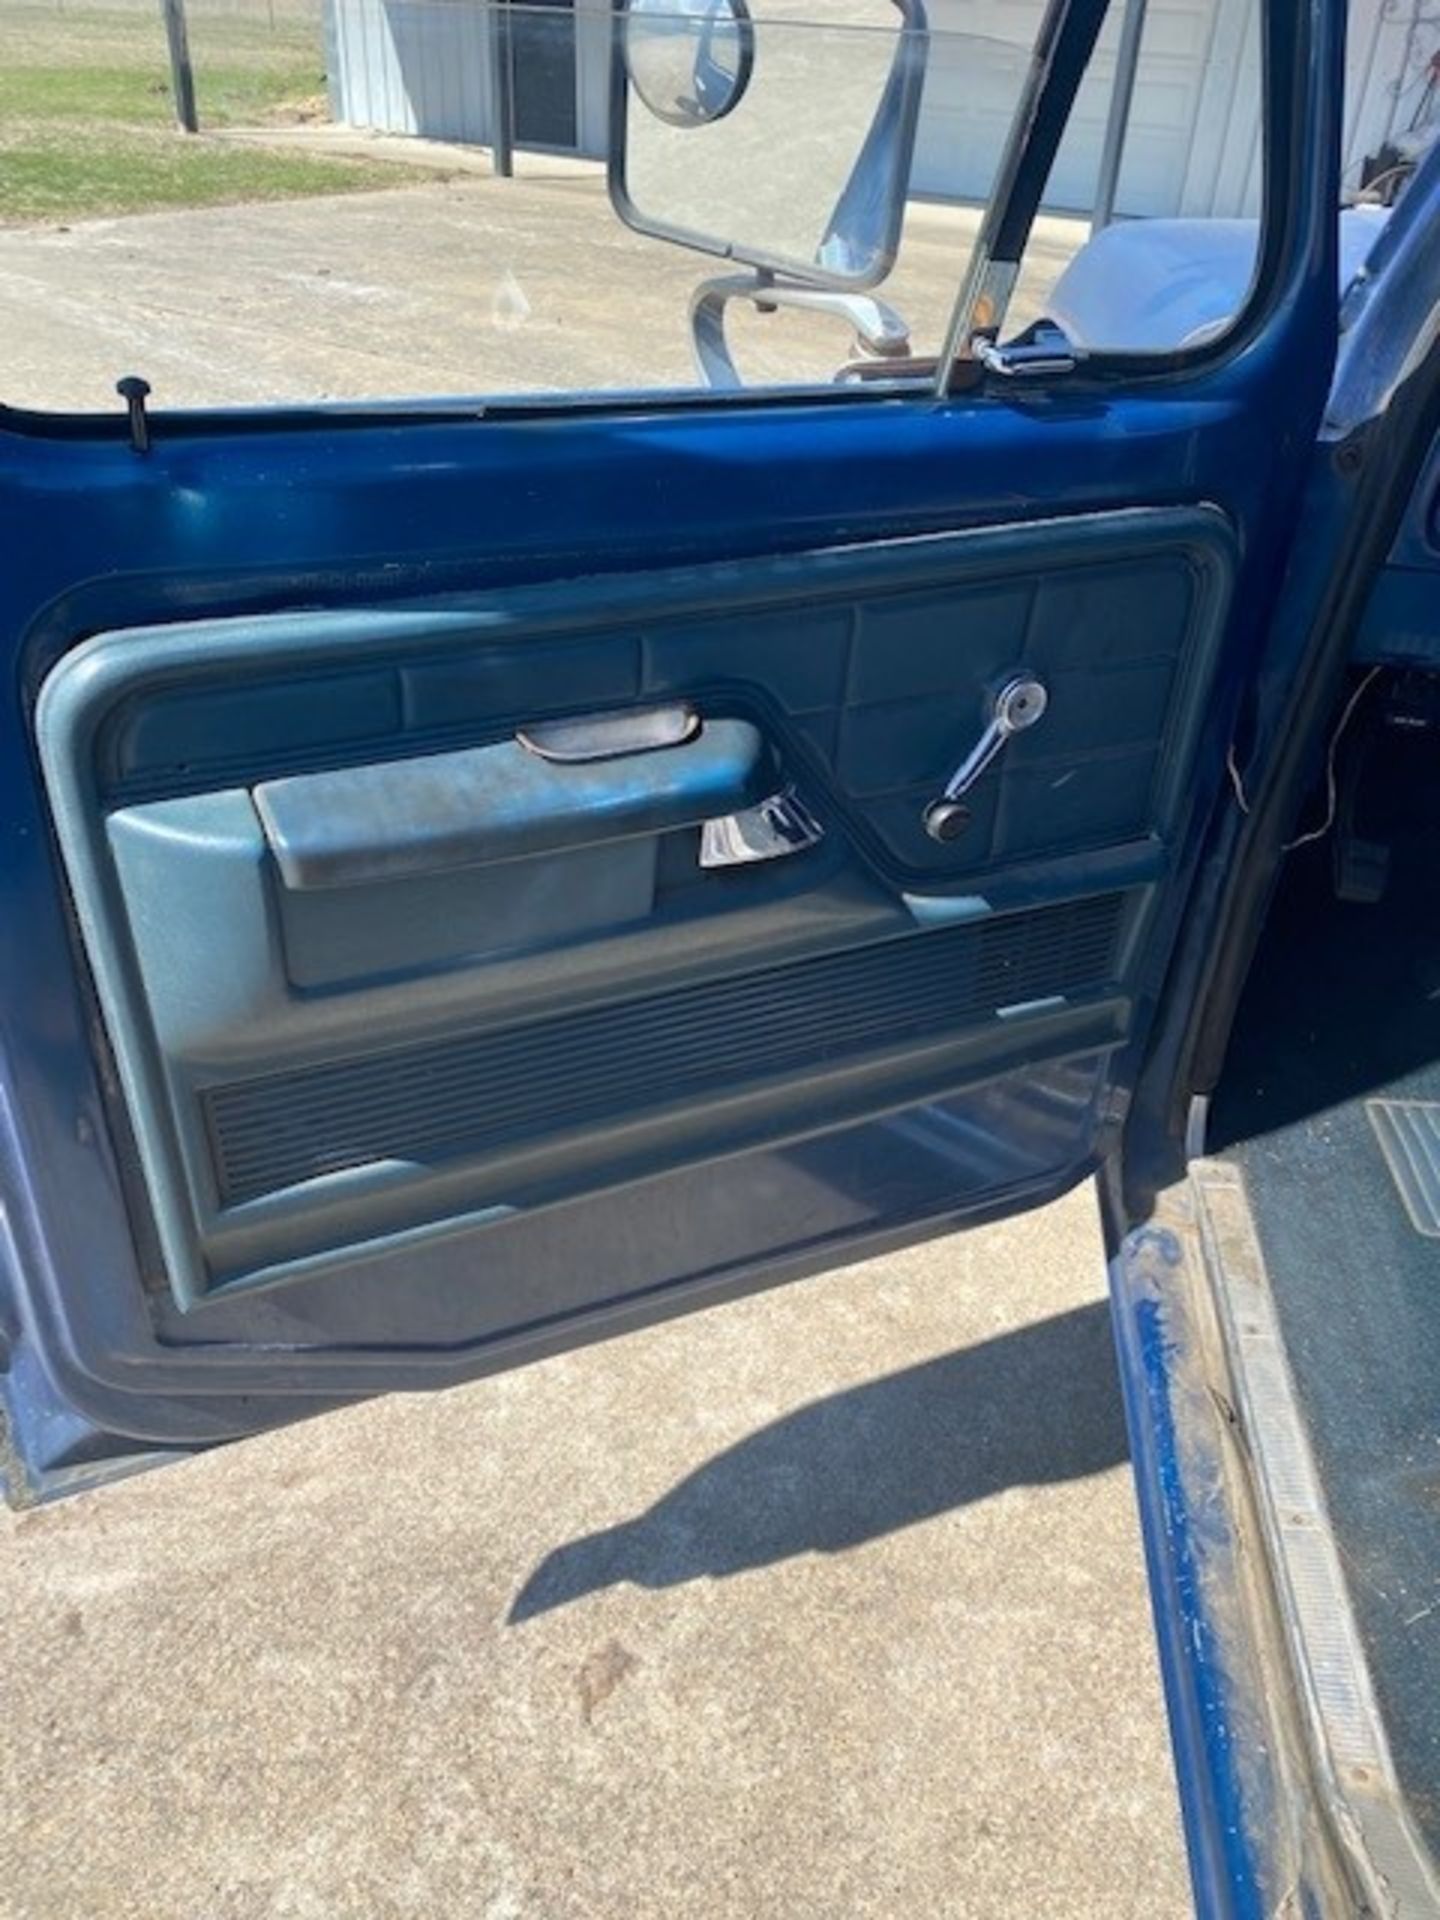 1977 Ford F150 Pickup - Image 19 of 20